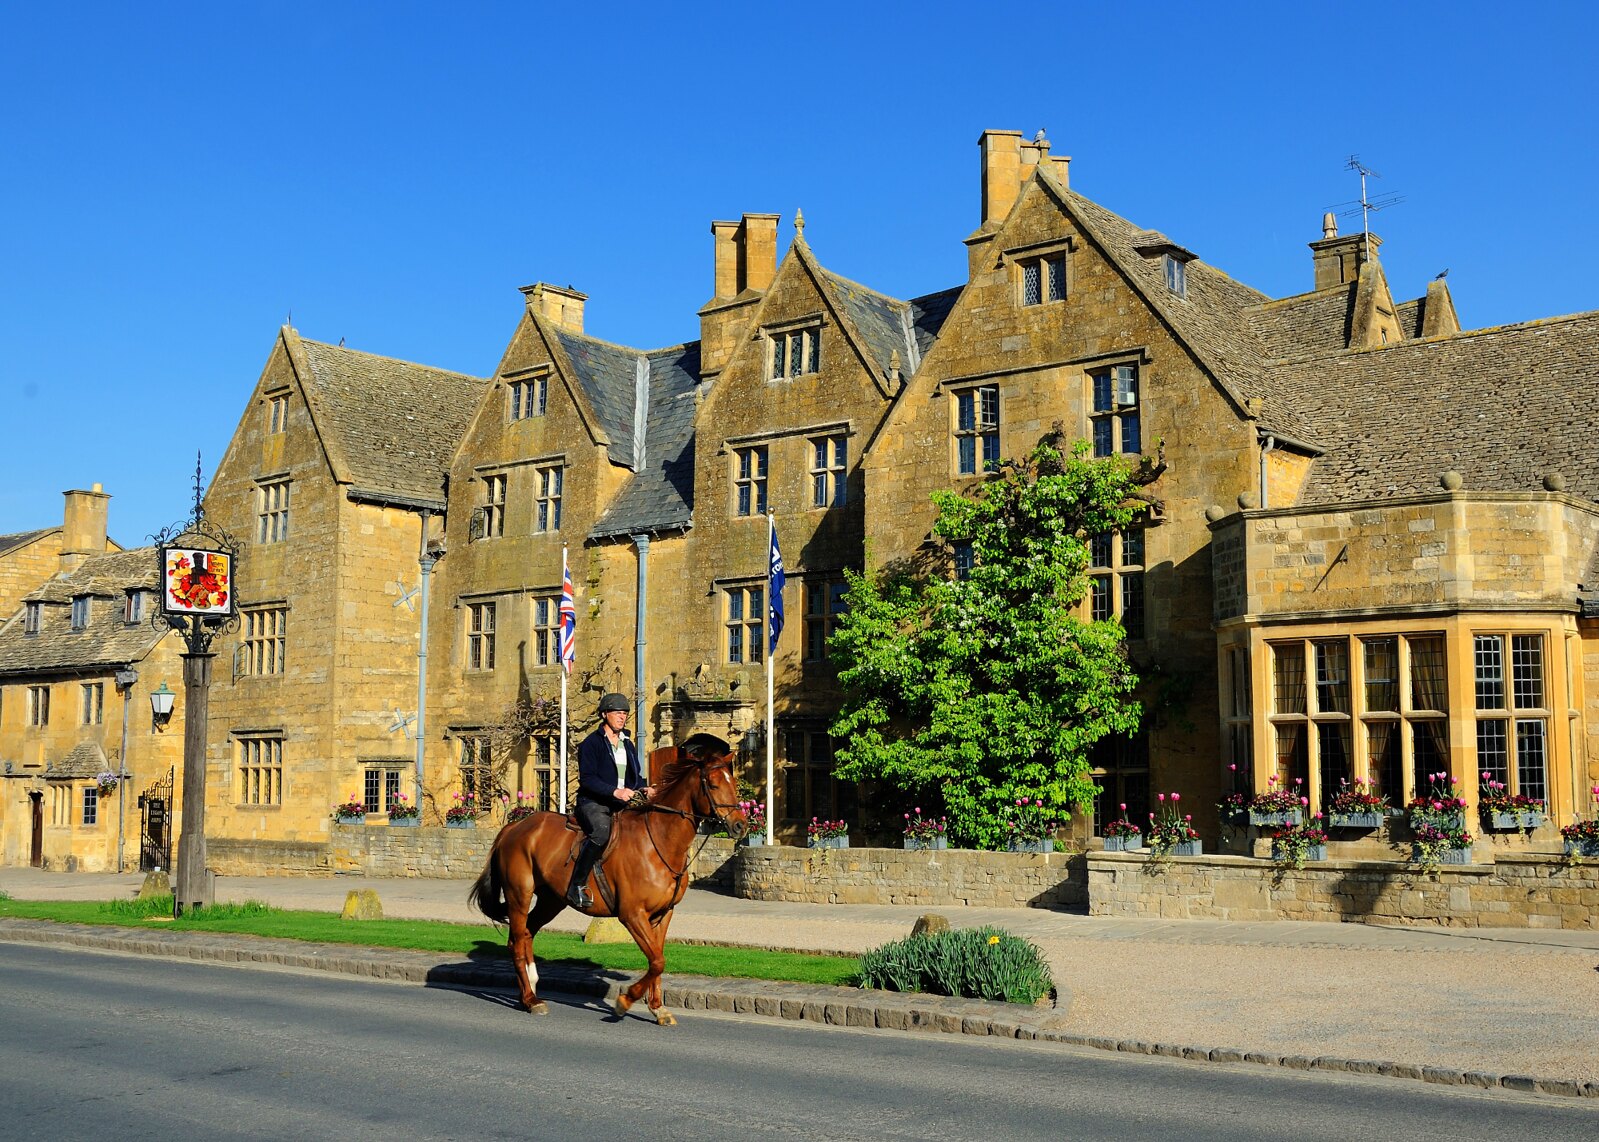 A rider passes in front of the Lygon Arms hotel in Broadway. Credit Saffron Blaze